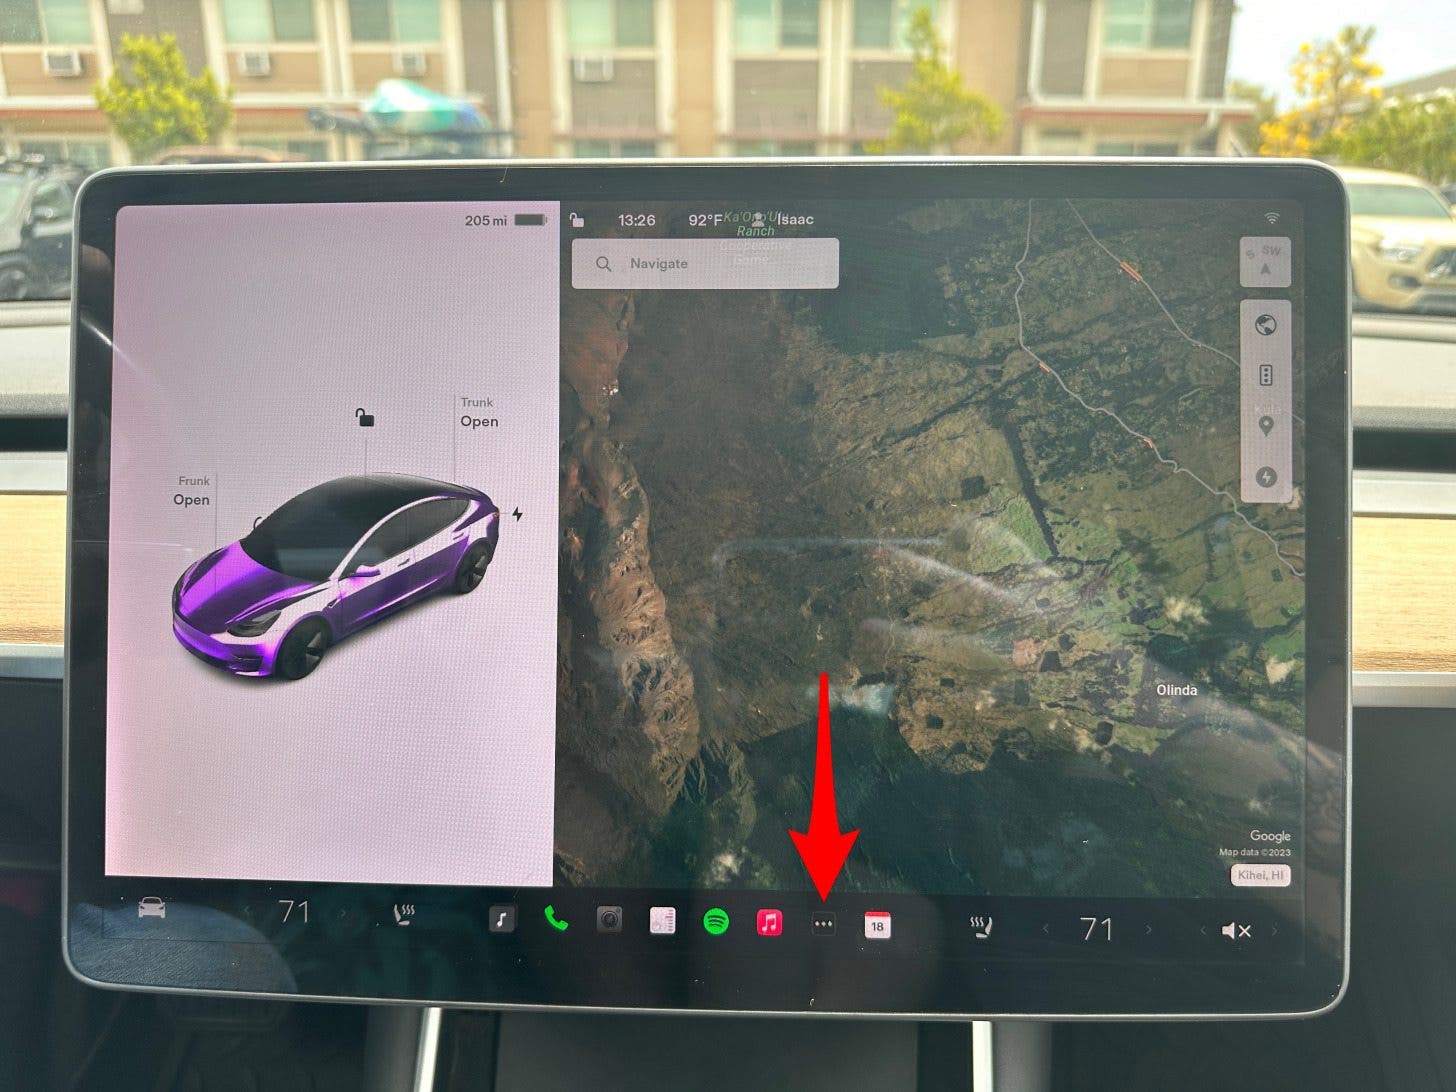 To use Tesla Waze, tap All Apps in the Launcher.